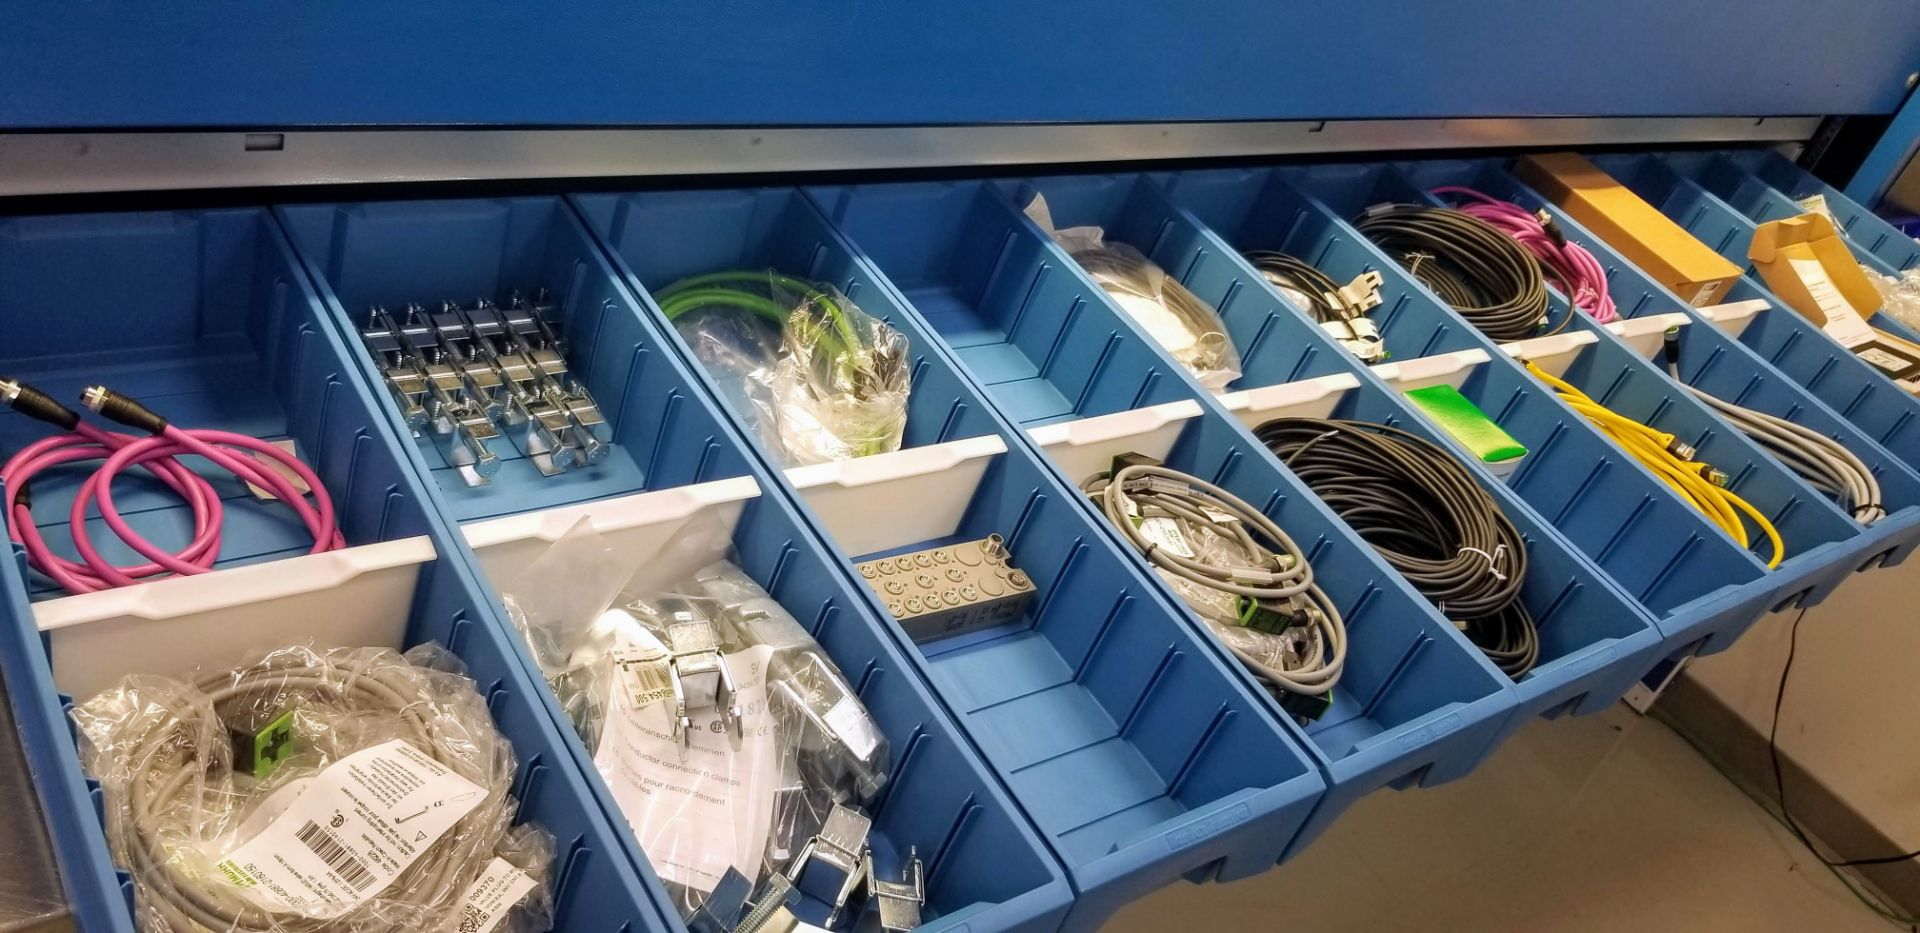 LOT - CONTENTS OF 36 SHELVES INCLUDING: MOTOR CABLES, HYBRID CABLES, PLUGS, INPUT CARDS, MODULES, - Image 63 of 100